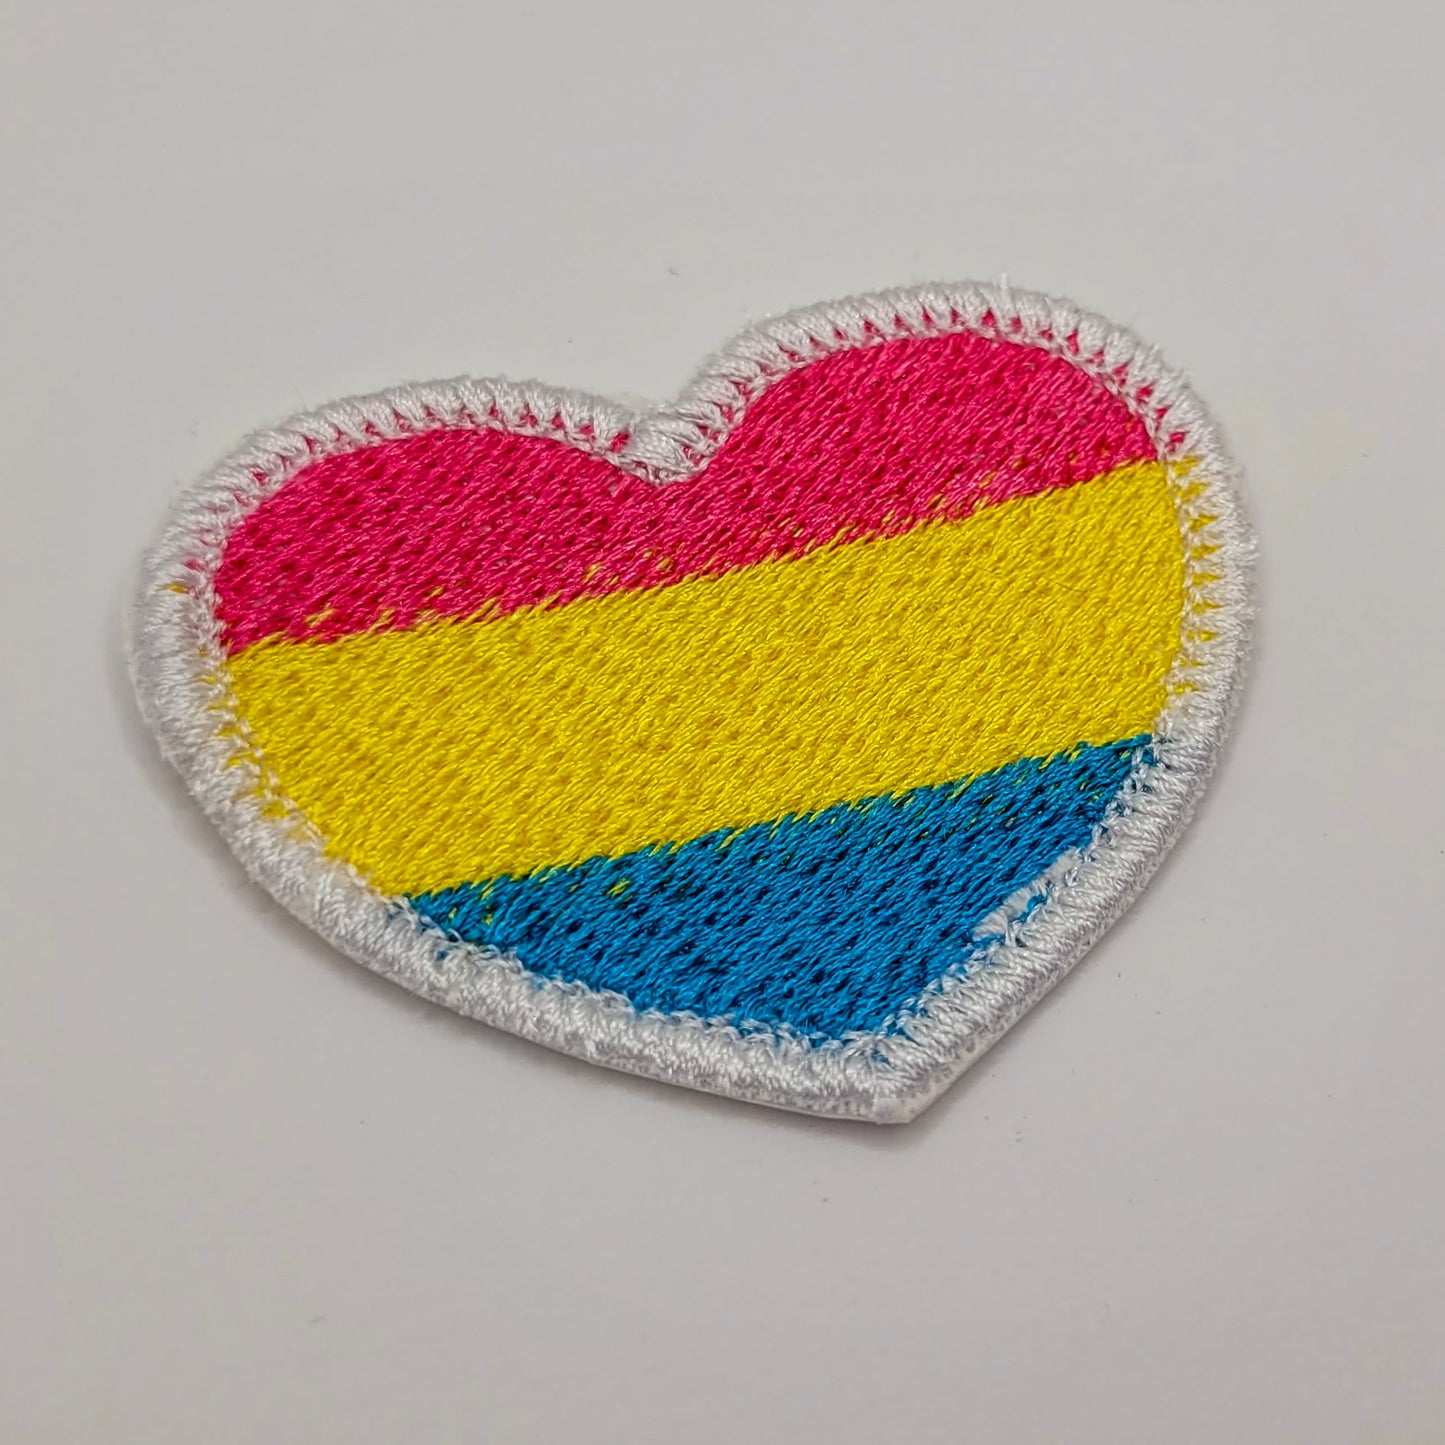 Pansexual Pride Heart Patch